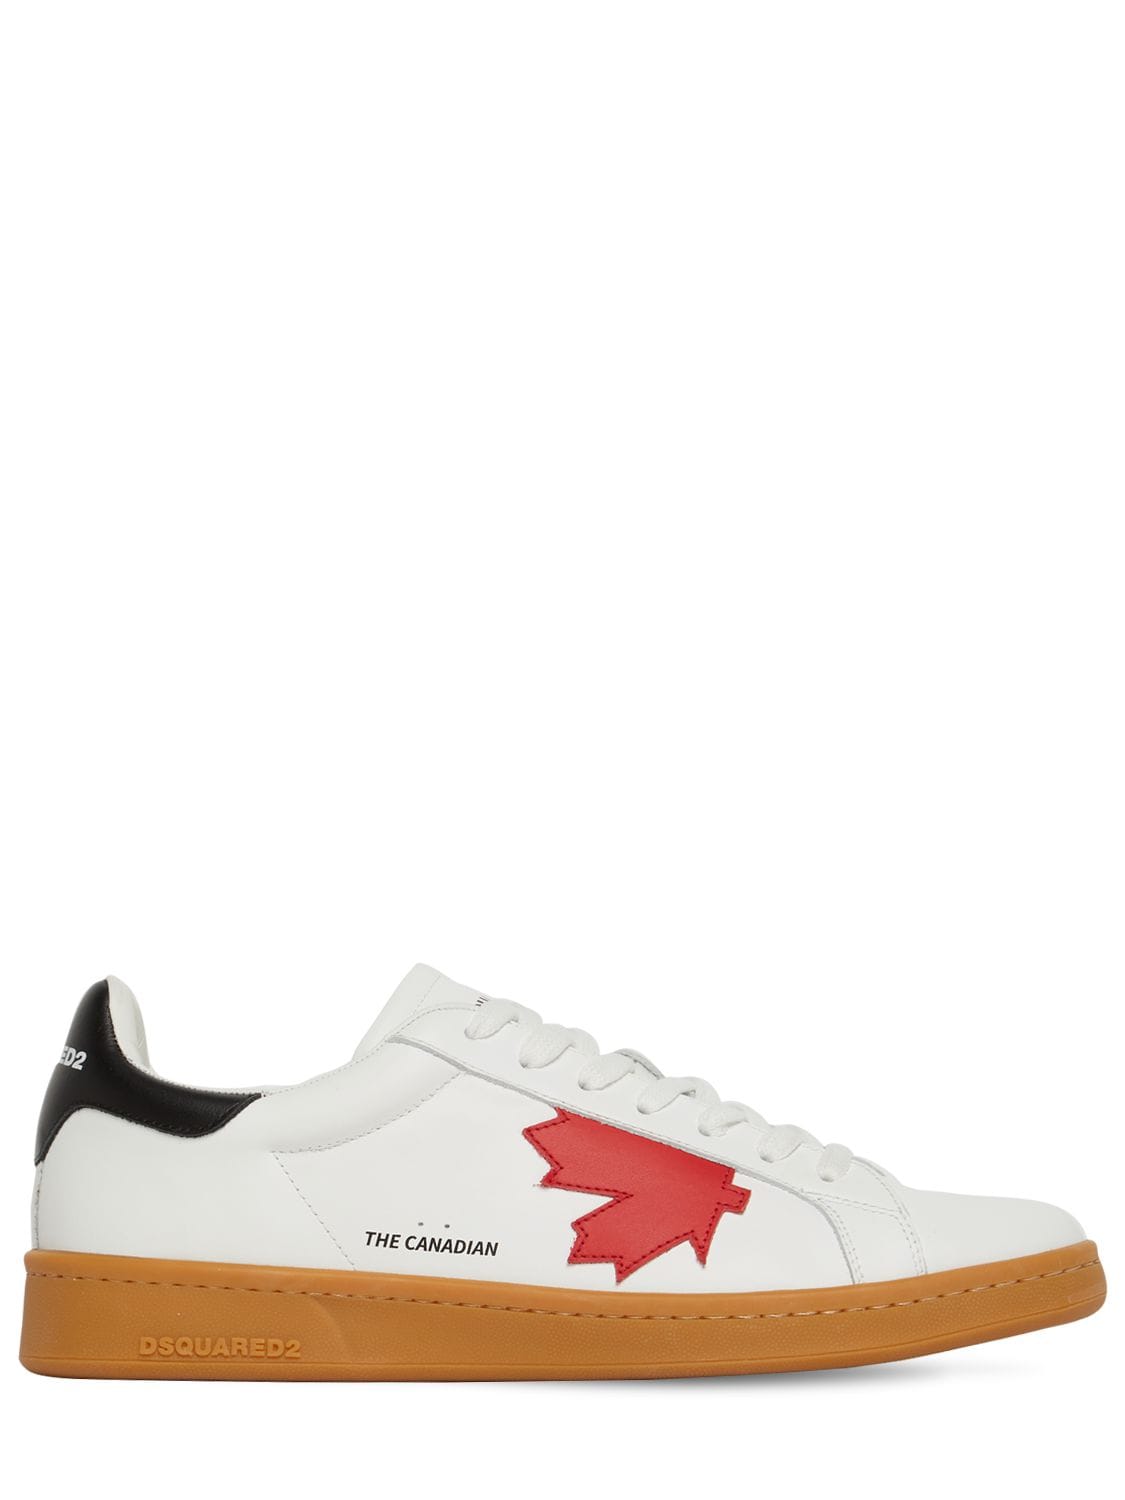 DSQUARED² Leaf Boxer Leather Low for Men